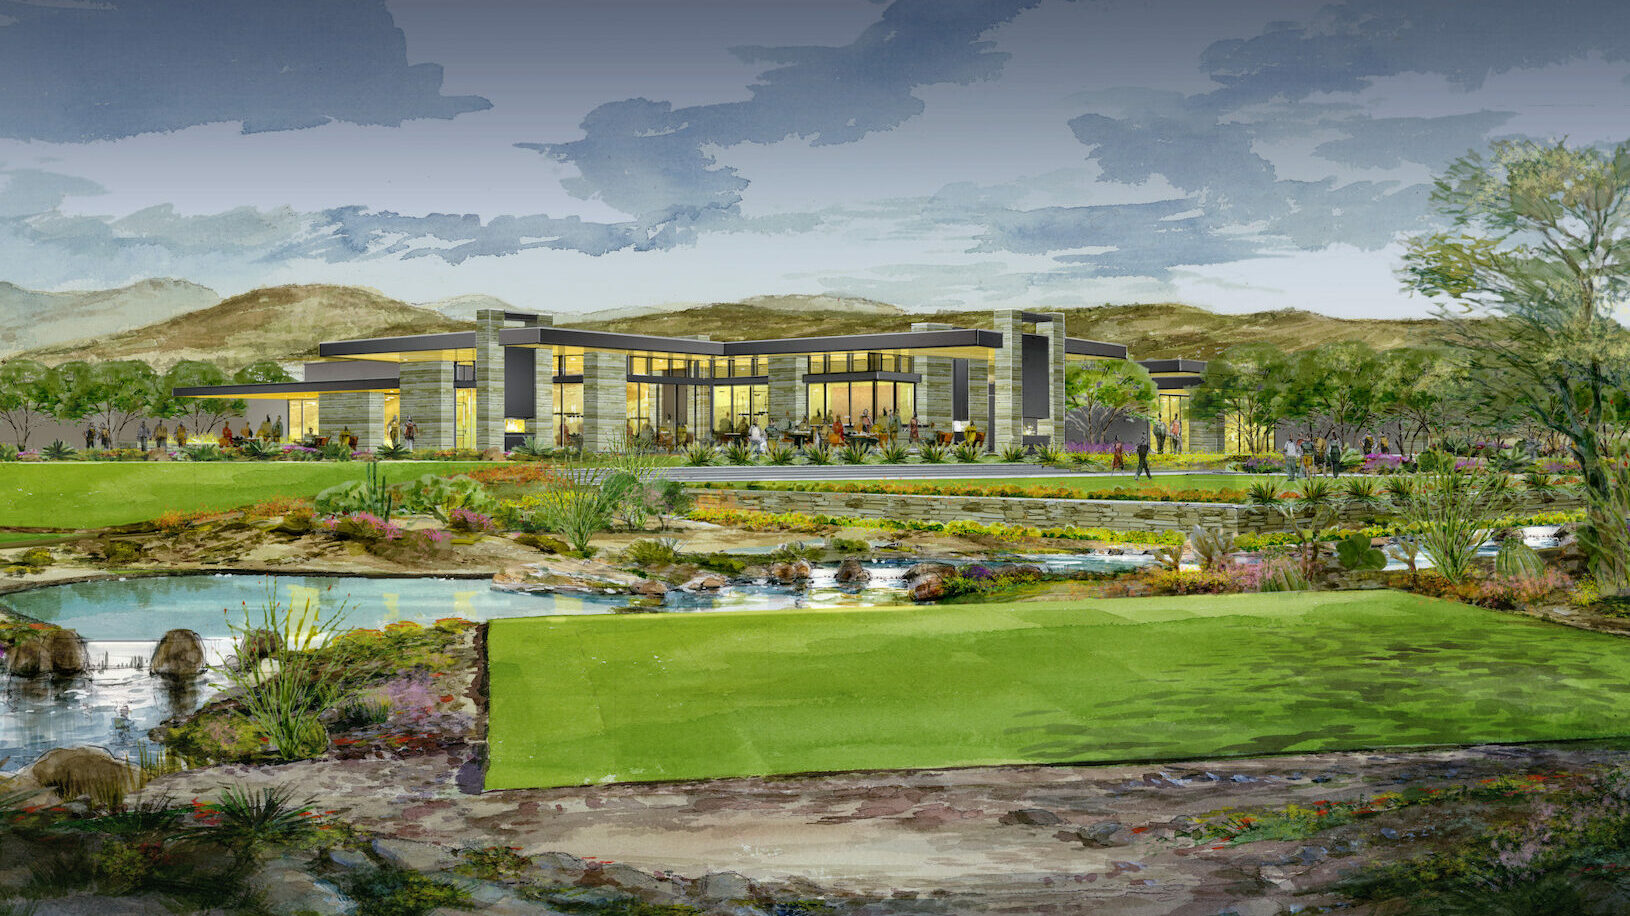 Desert Mountain Clubhouse designed by Drewett Works